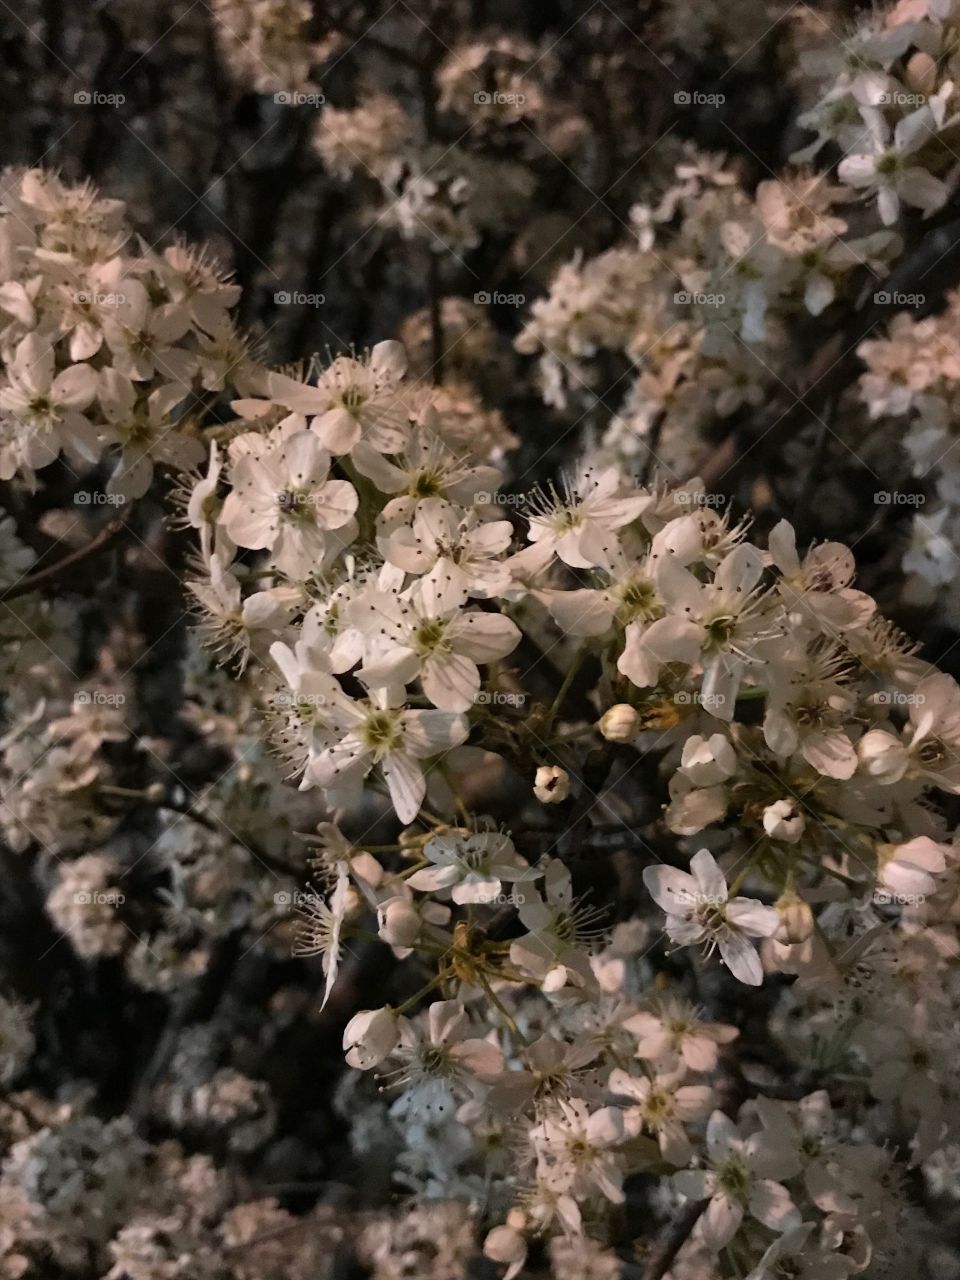 Night photo of Flowers in a Tree